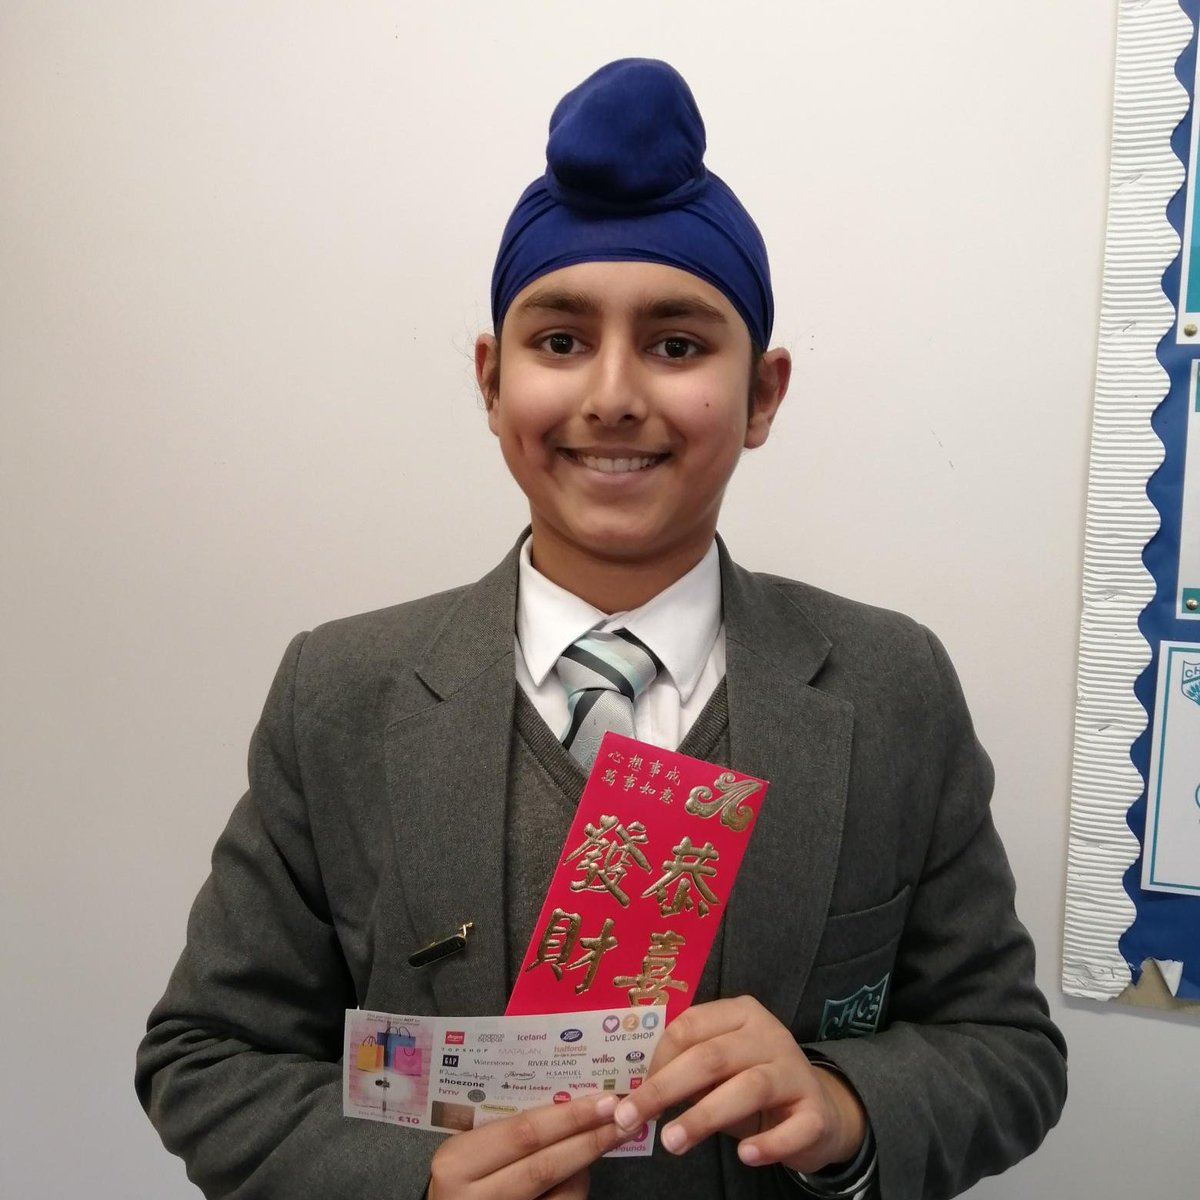 Congratulations to Gurnoor Singh in Year 7 for winning our Chinese New Year zodiac quiz!  He got all the animal book and movie titles right, using all the clues dotted around the school. Well done!
#diversity #schoolquiz #reward